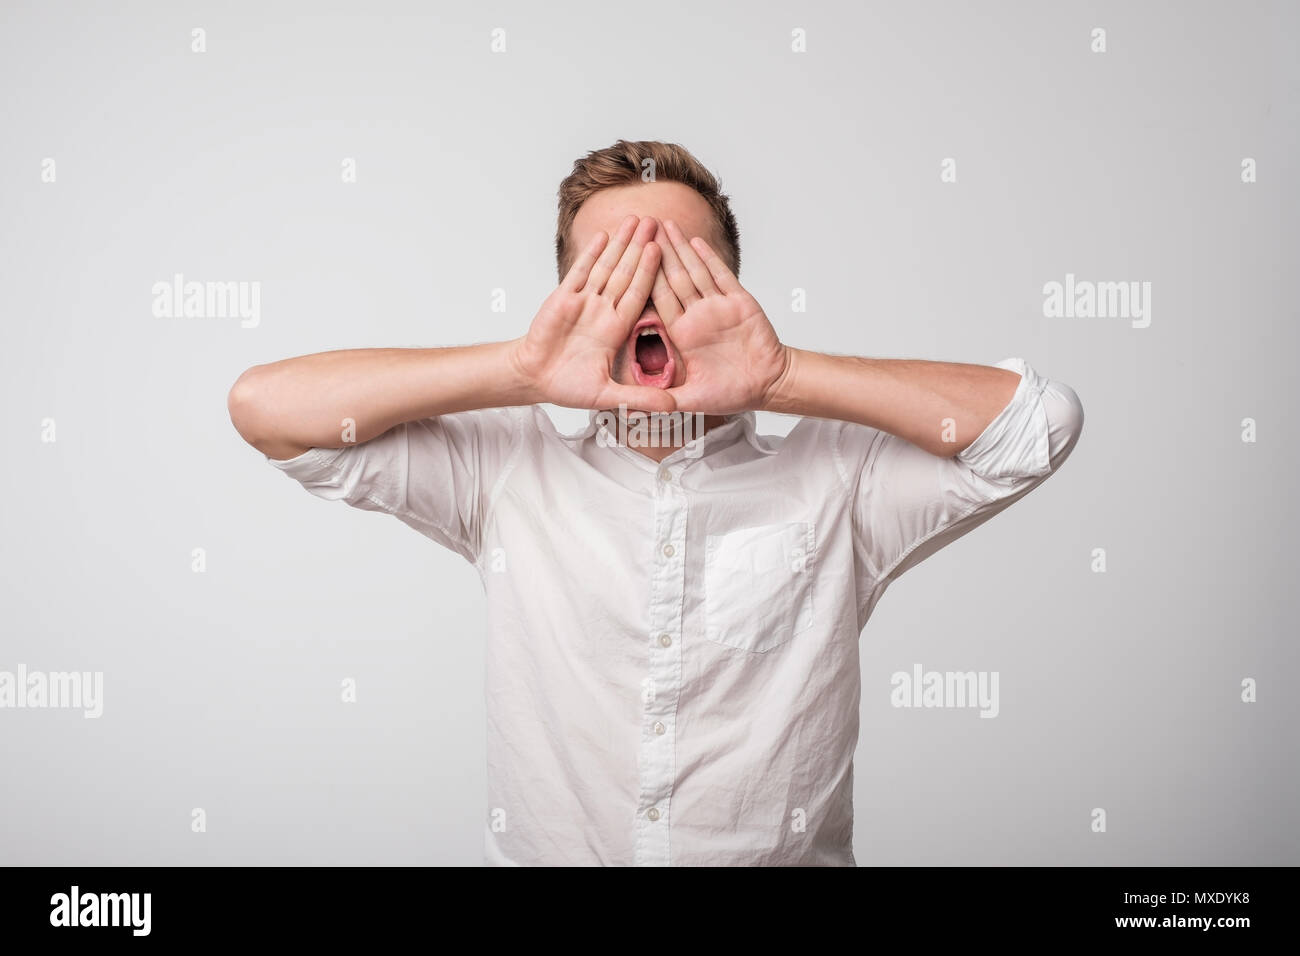 Attractive young caucasian man shouting. Stock Photo